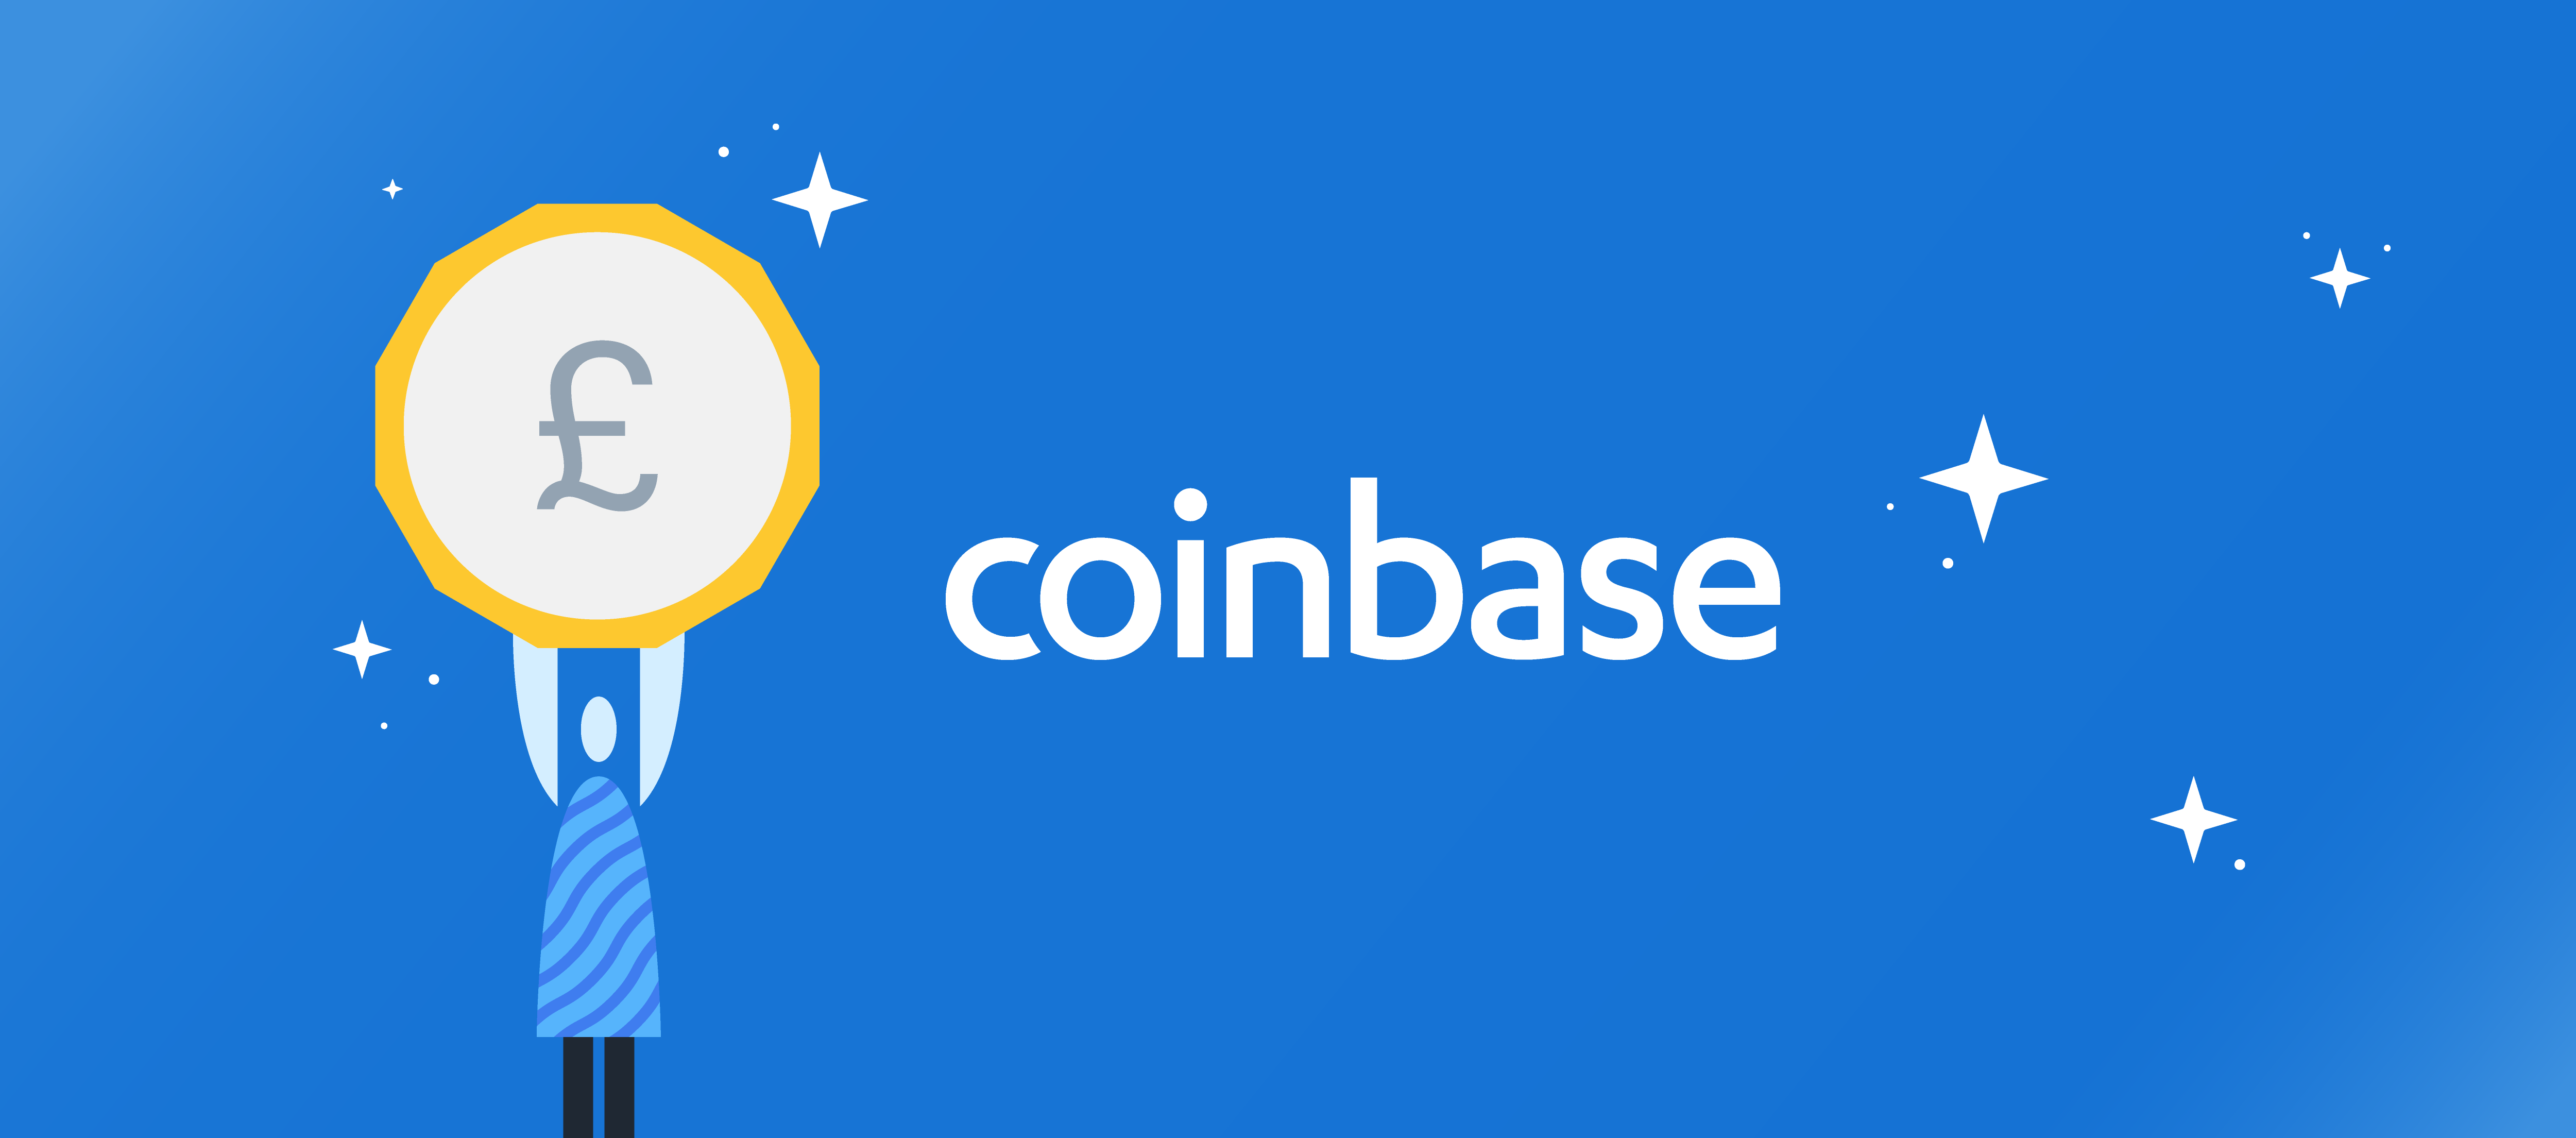 can you buy bitcoin with ethereum on coinbase